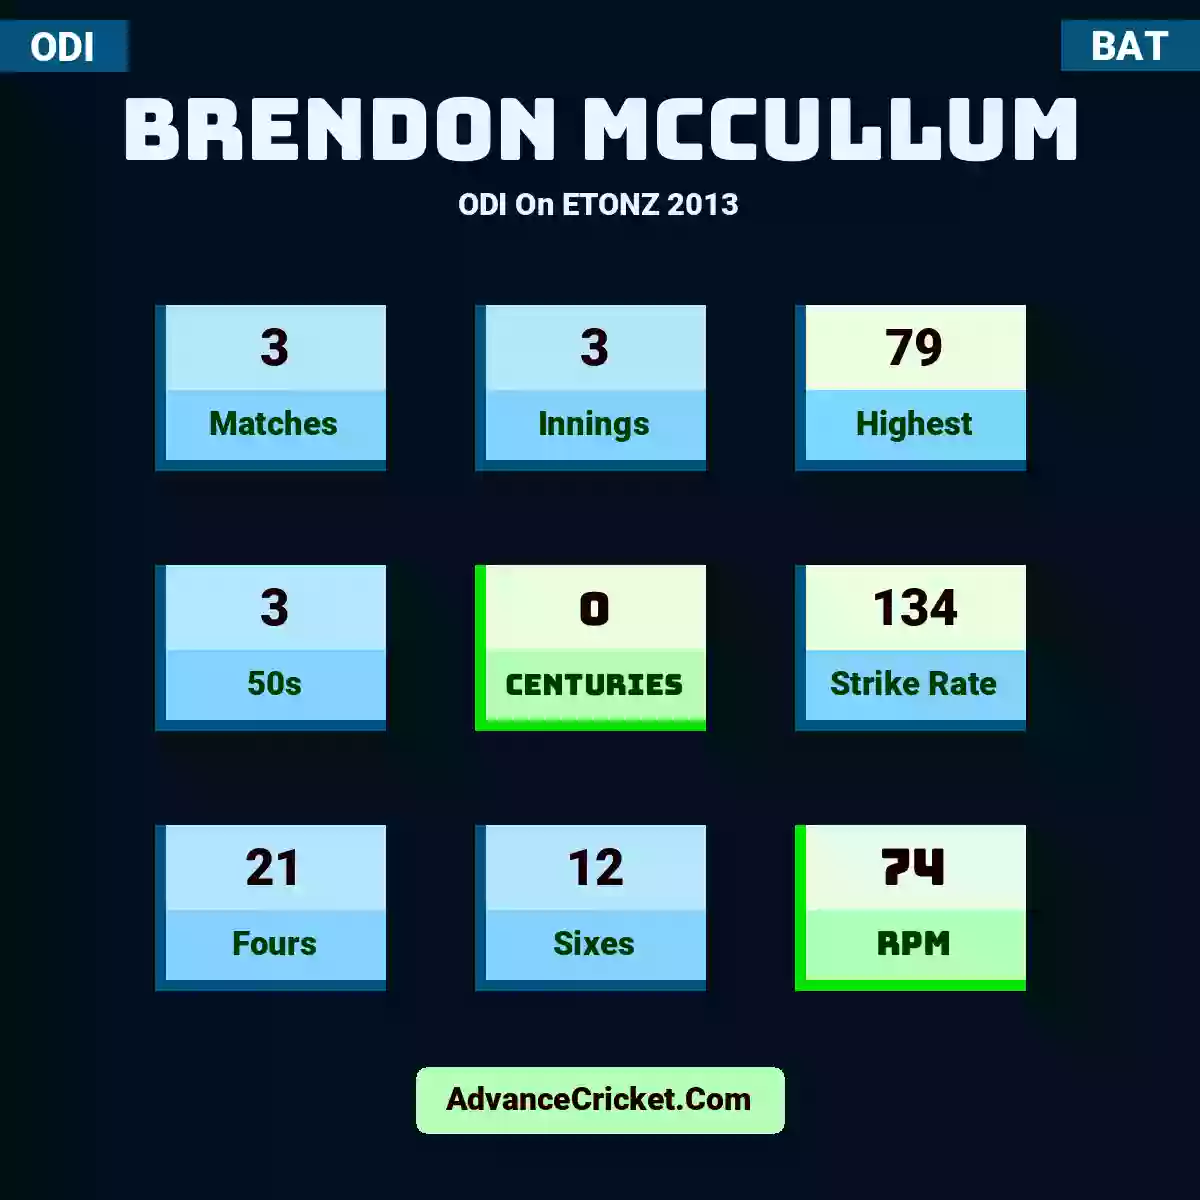 Brendon McCullum ODI  On ETONZ 2013, Brendon McCullum played 3 matches, scored 79 runs as highest, 3 half-centuries, and 0 centuries, with a strike rate of 134. B.McCullum hit 21 fours and 12 sixes, with an RPM of 74.